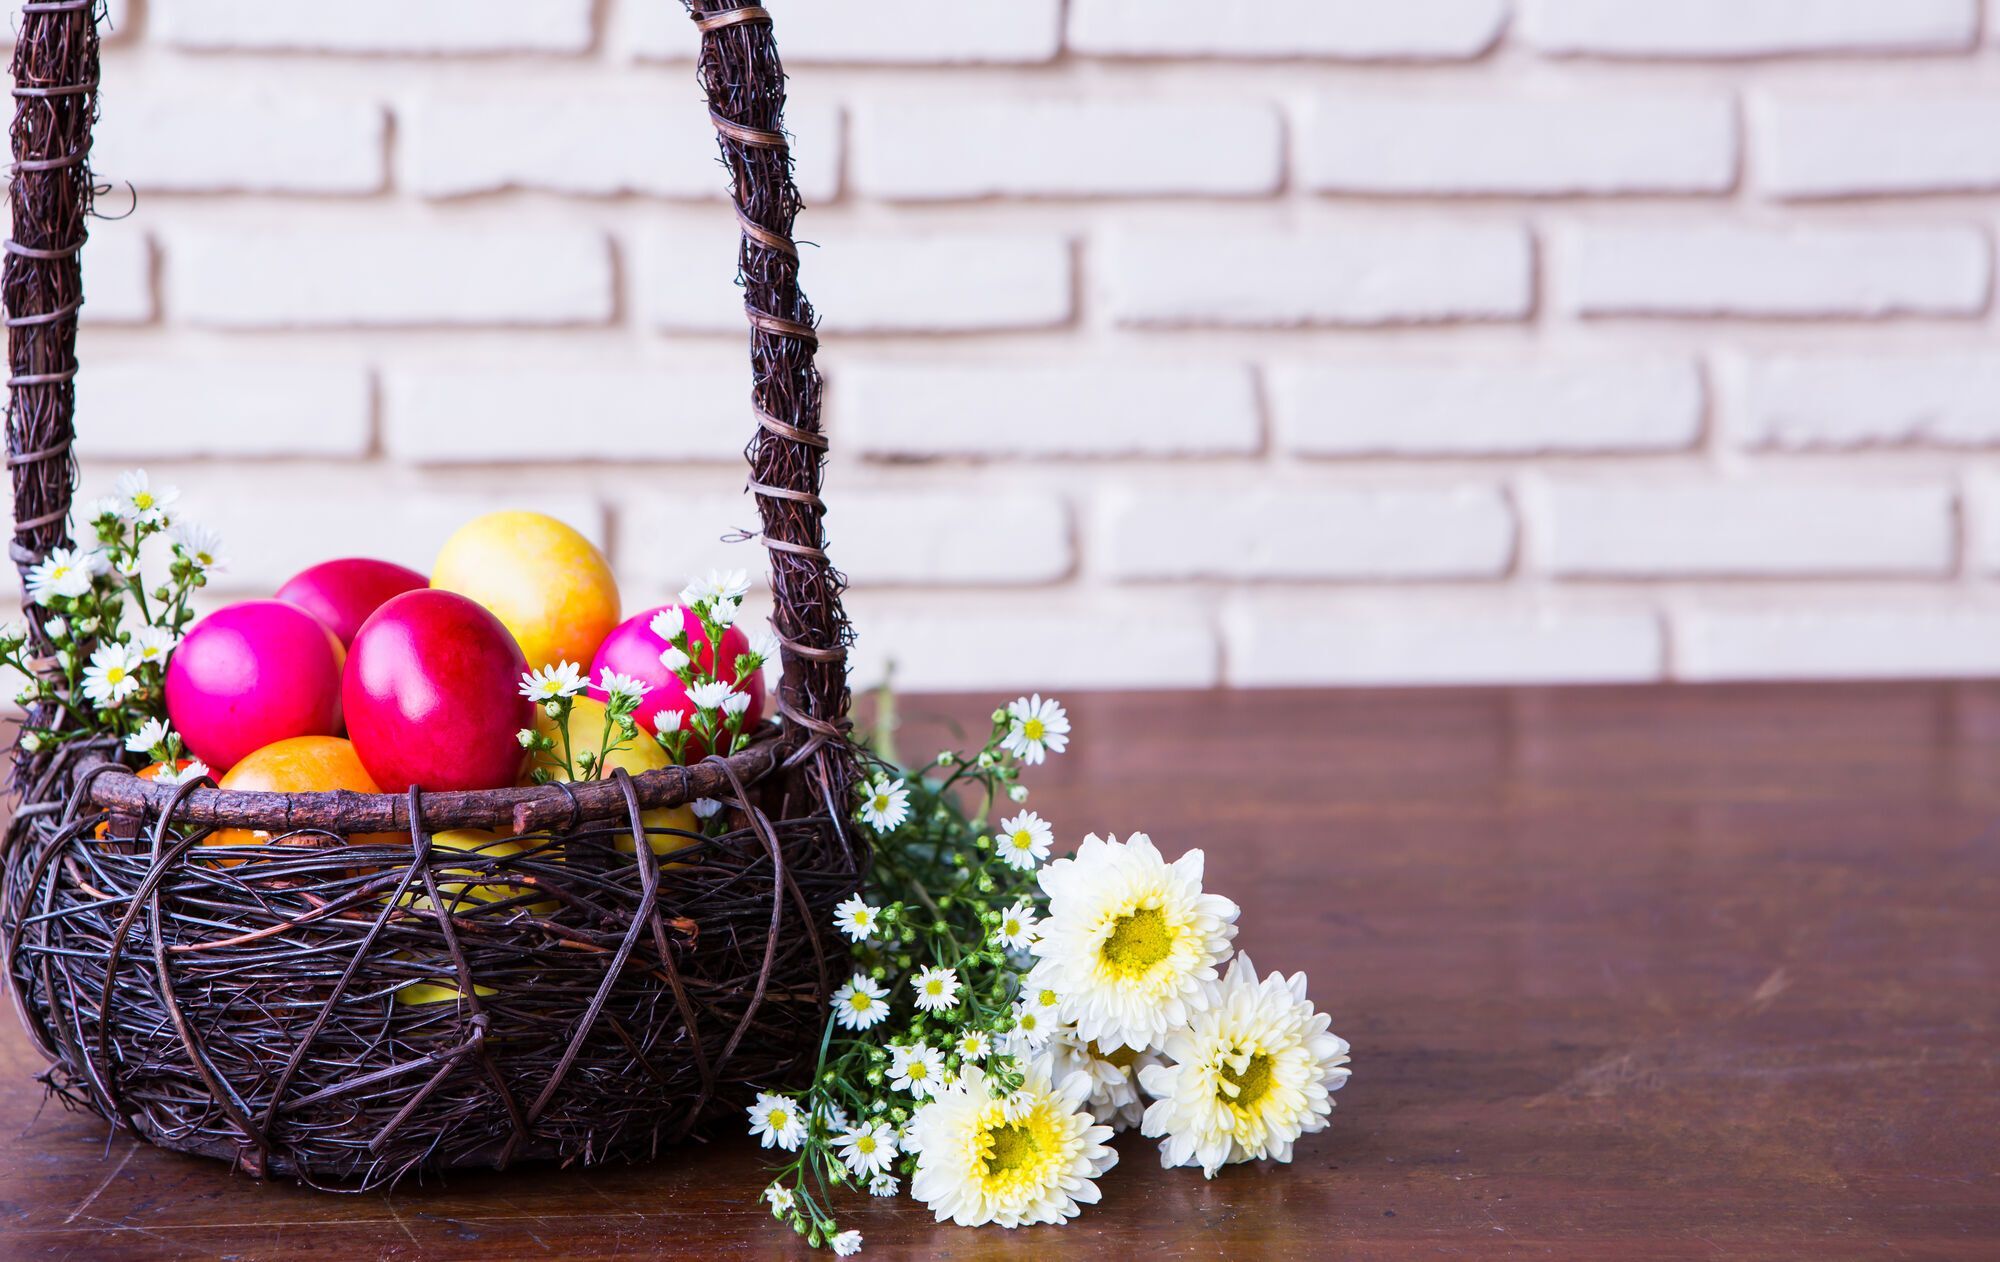 What to eat first on Easter: traditions of the holiday